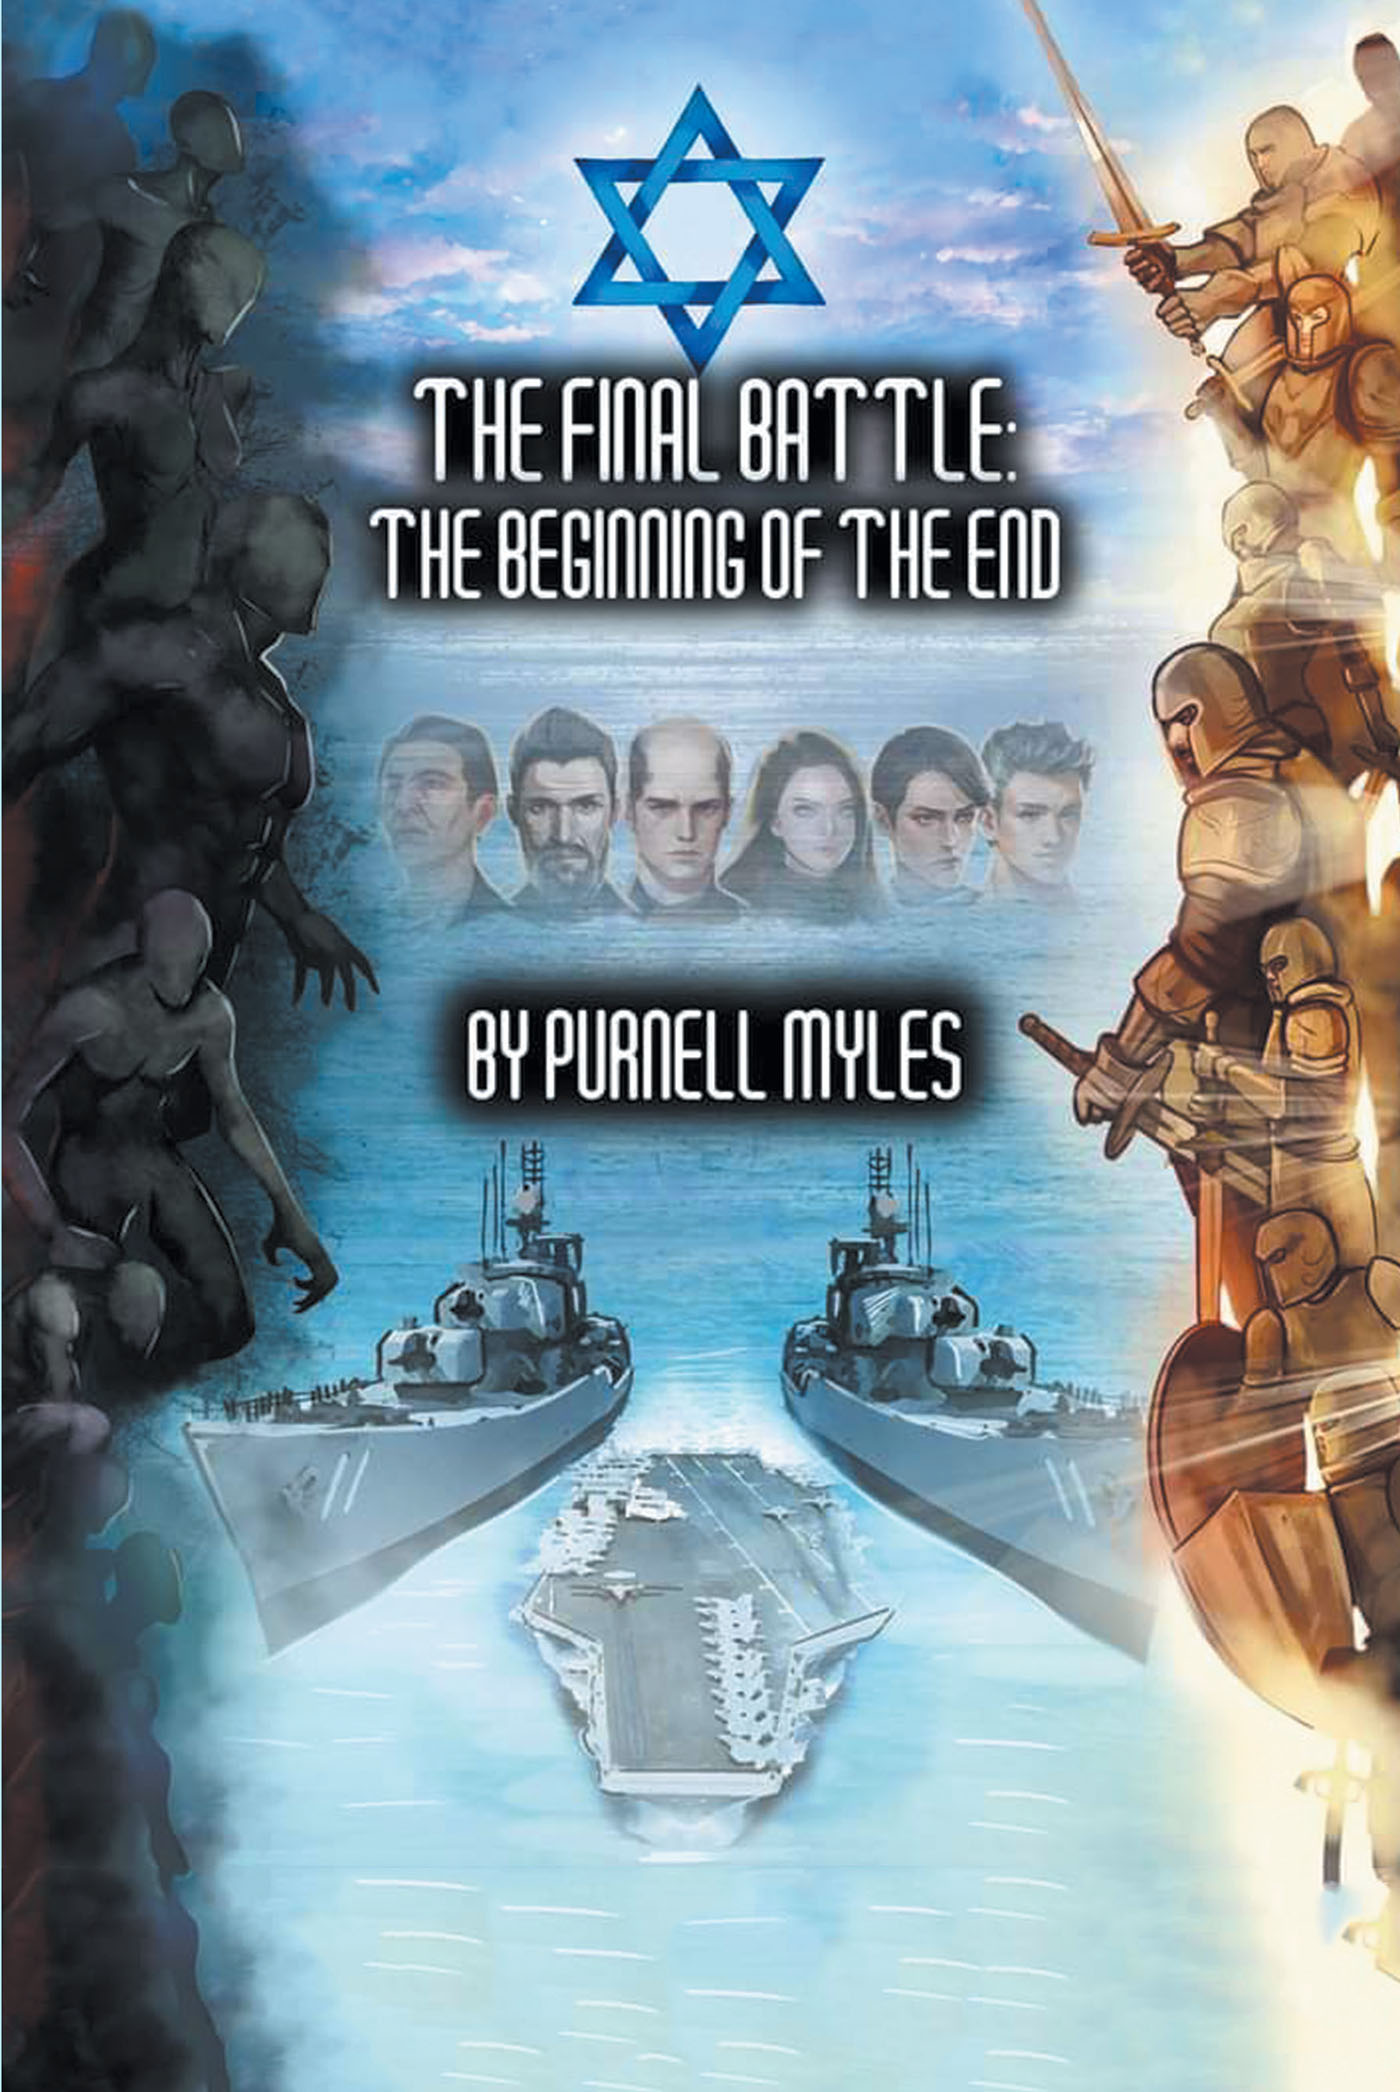 Author Purnell Myles’s New Book, “The Final Battle: The Beginning of the End,” Follows an Intense Struggle to Prevent Satan and His Forces from Waging War